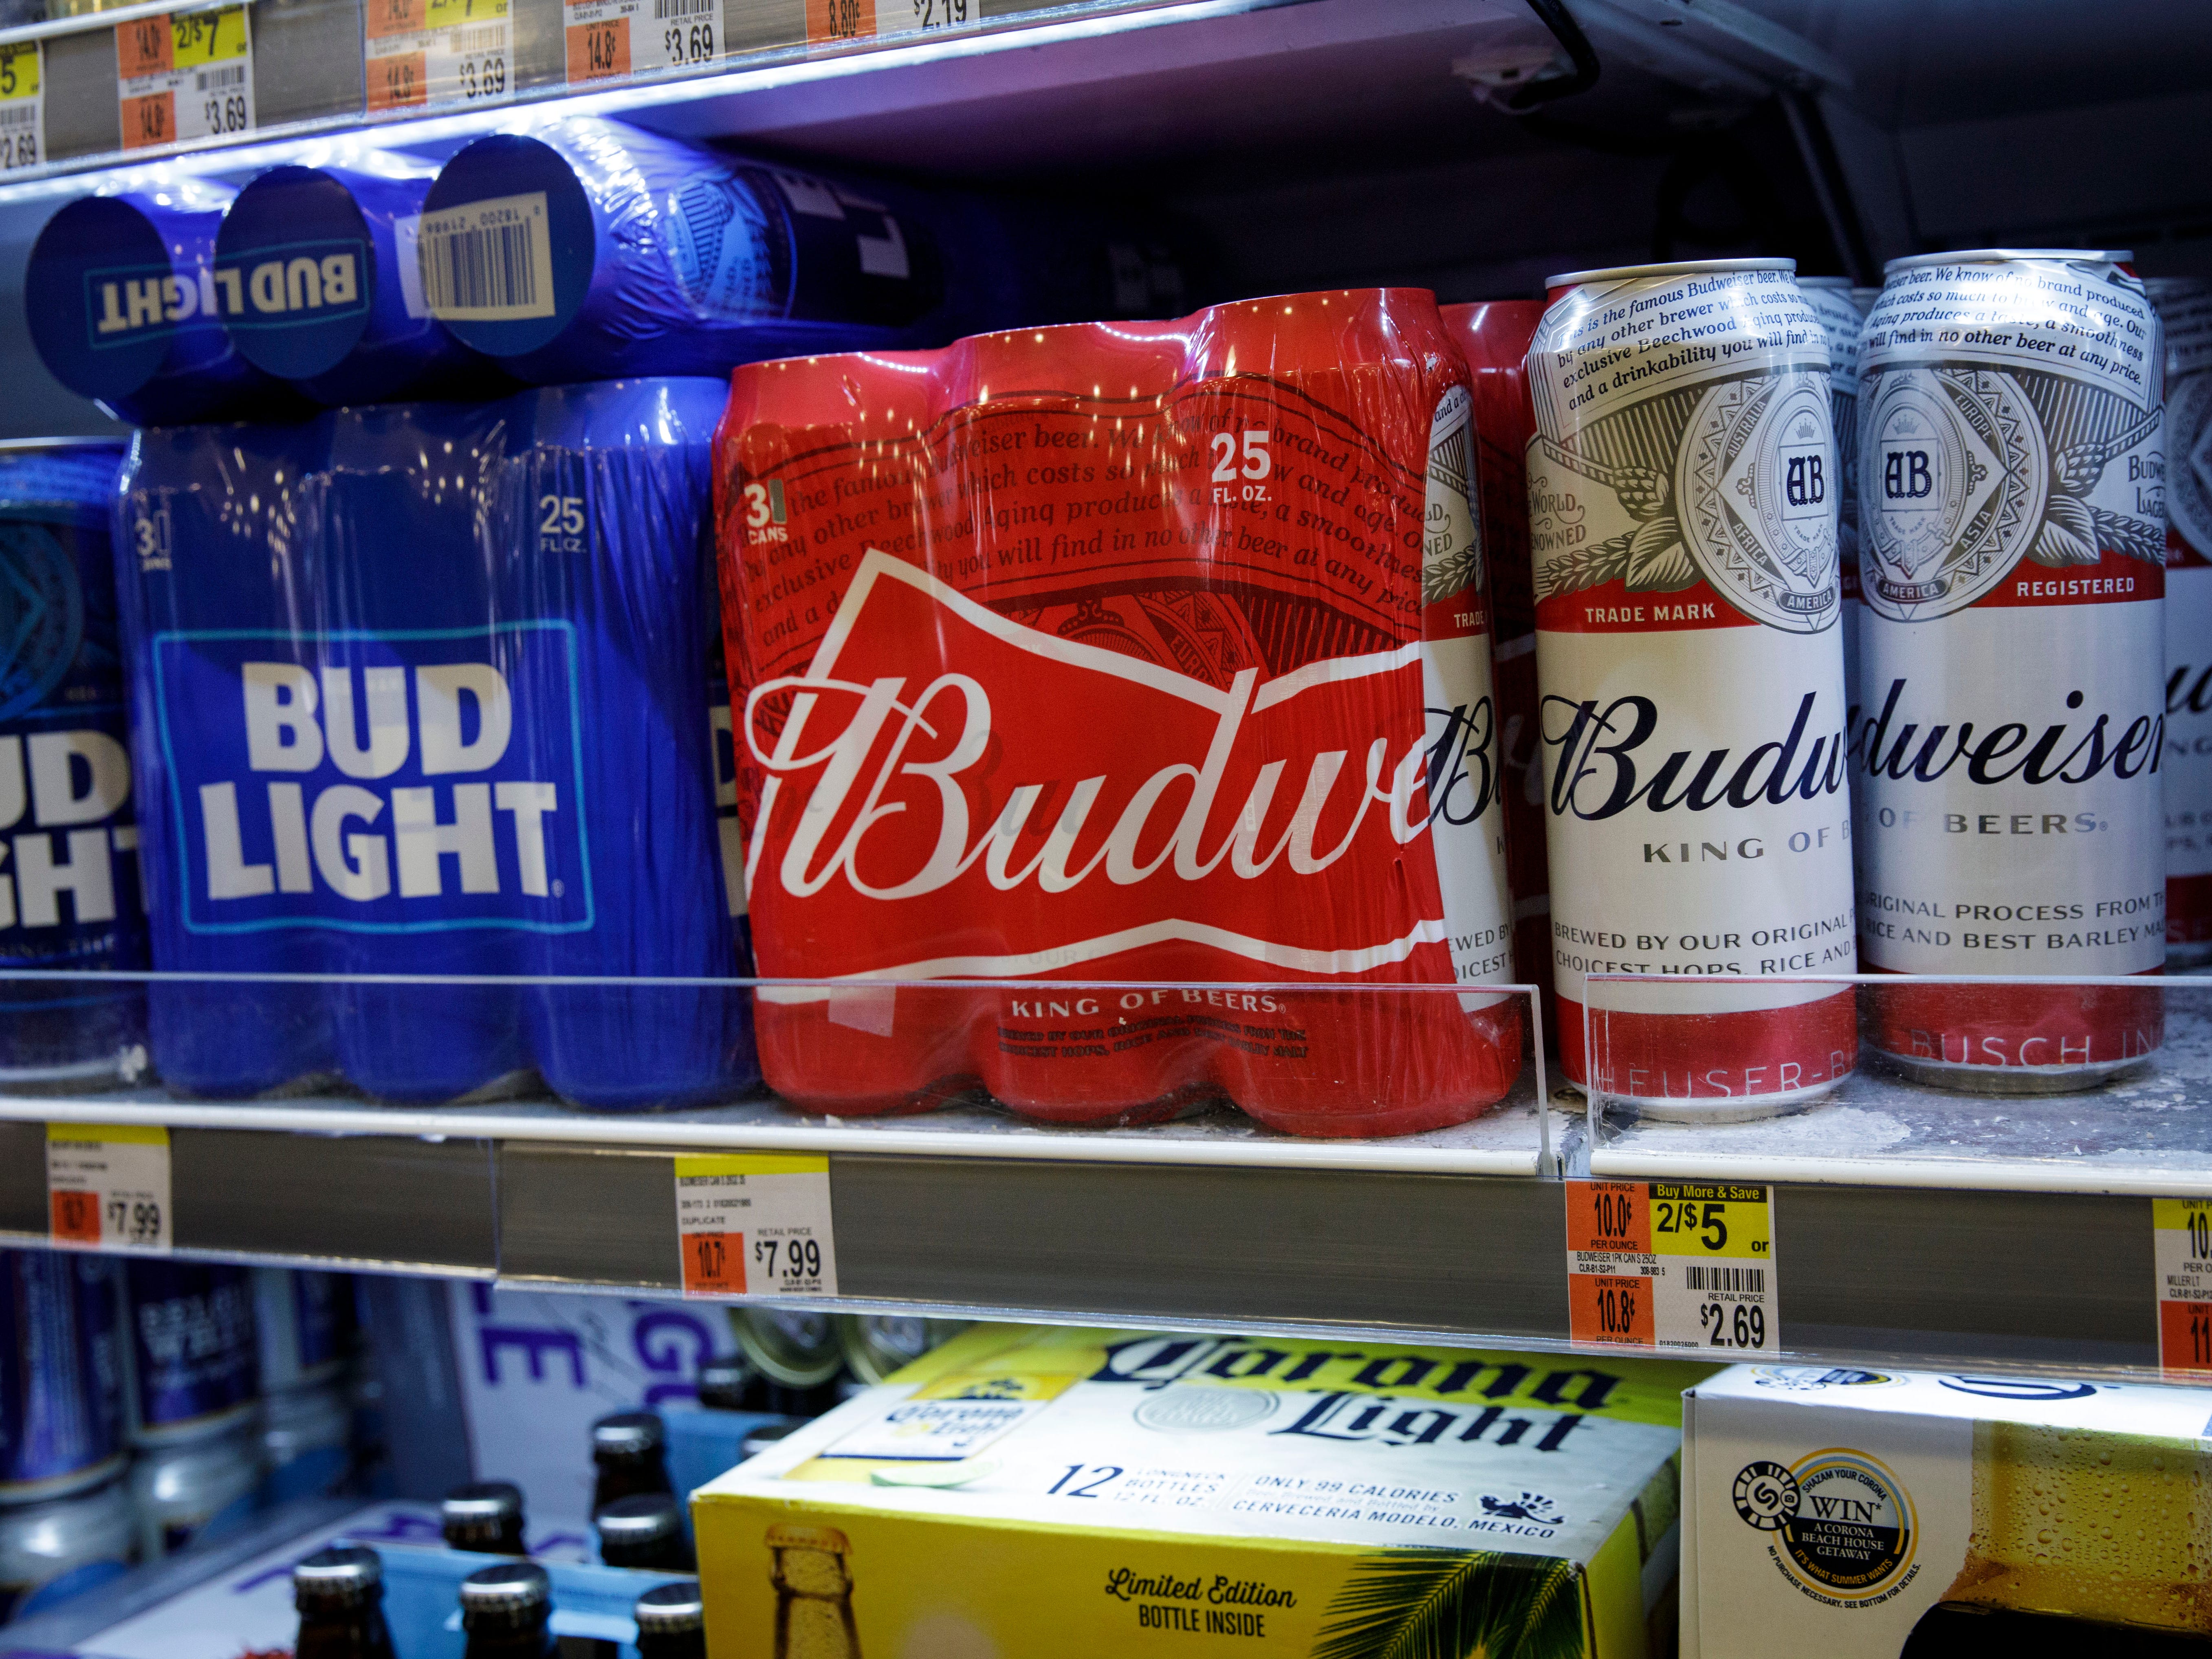 Bud Light sales continue crashing, Coors Light sales rise (NYSE:BUD)